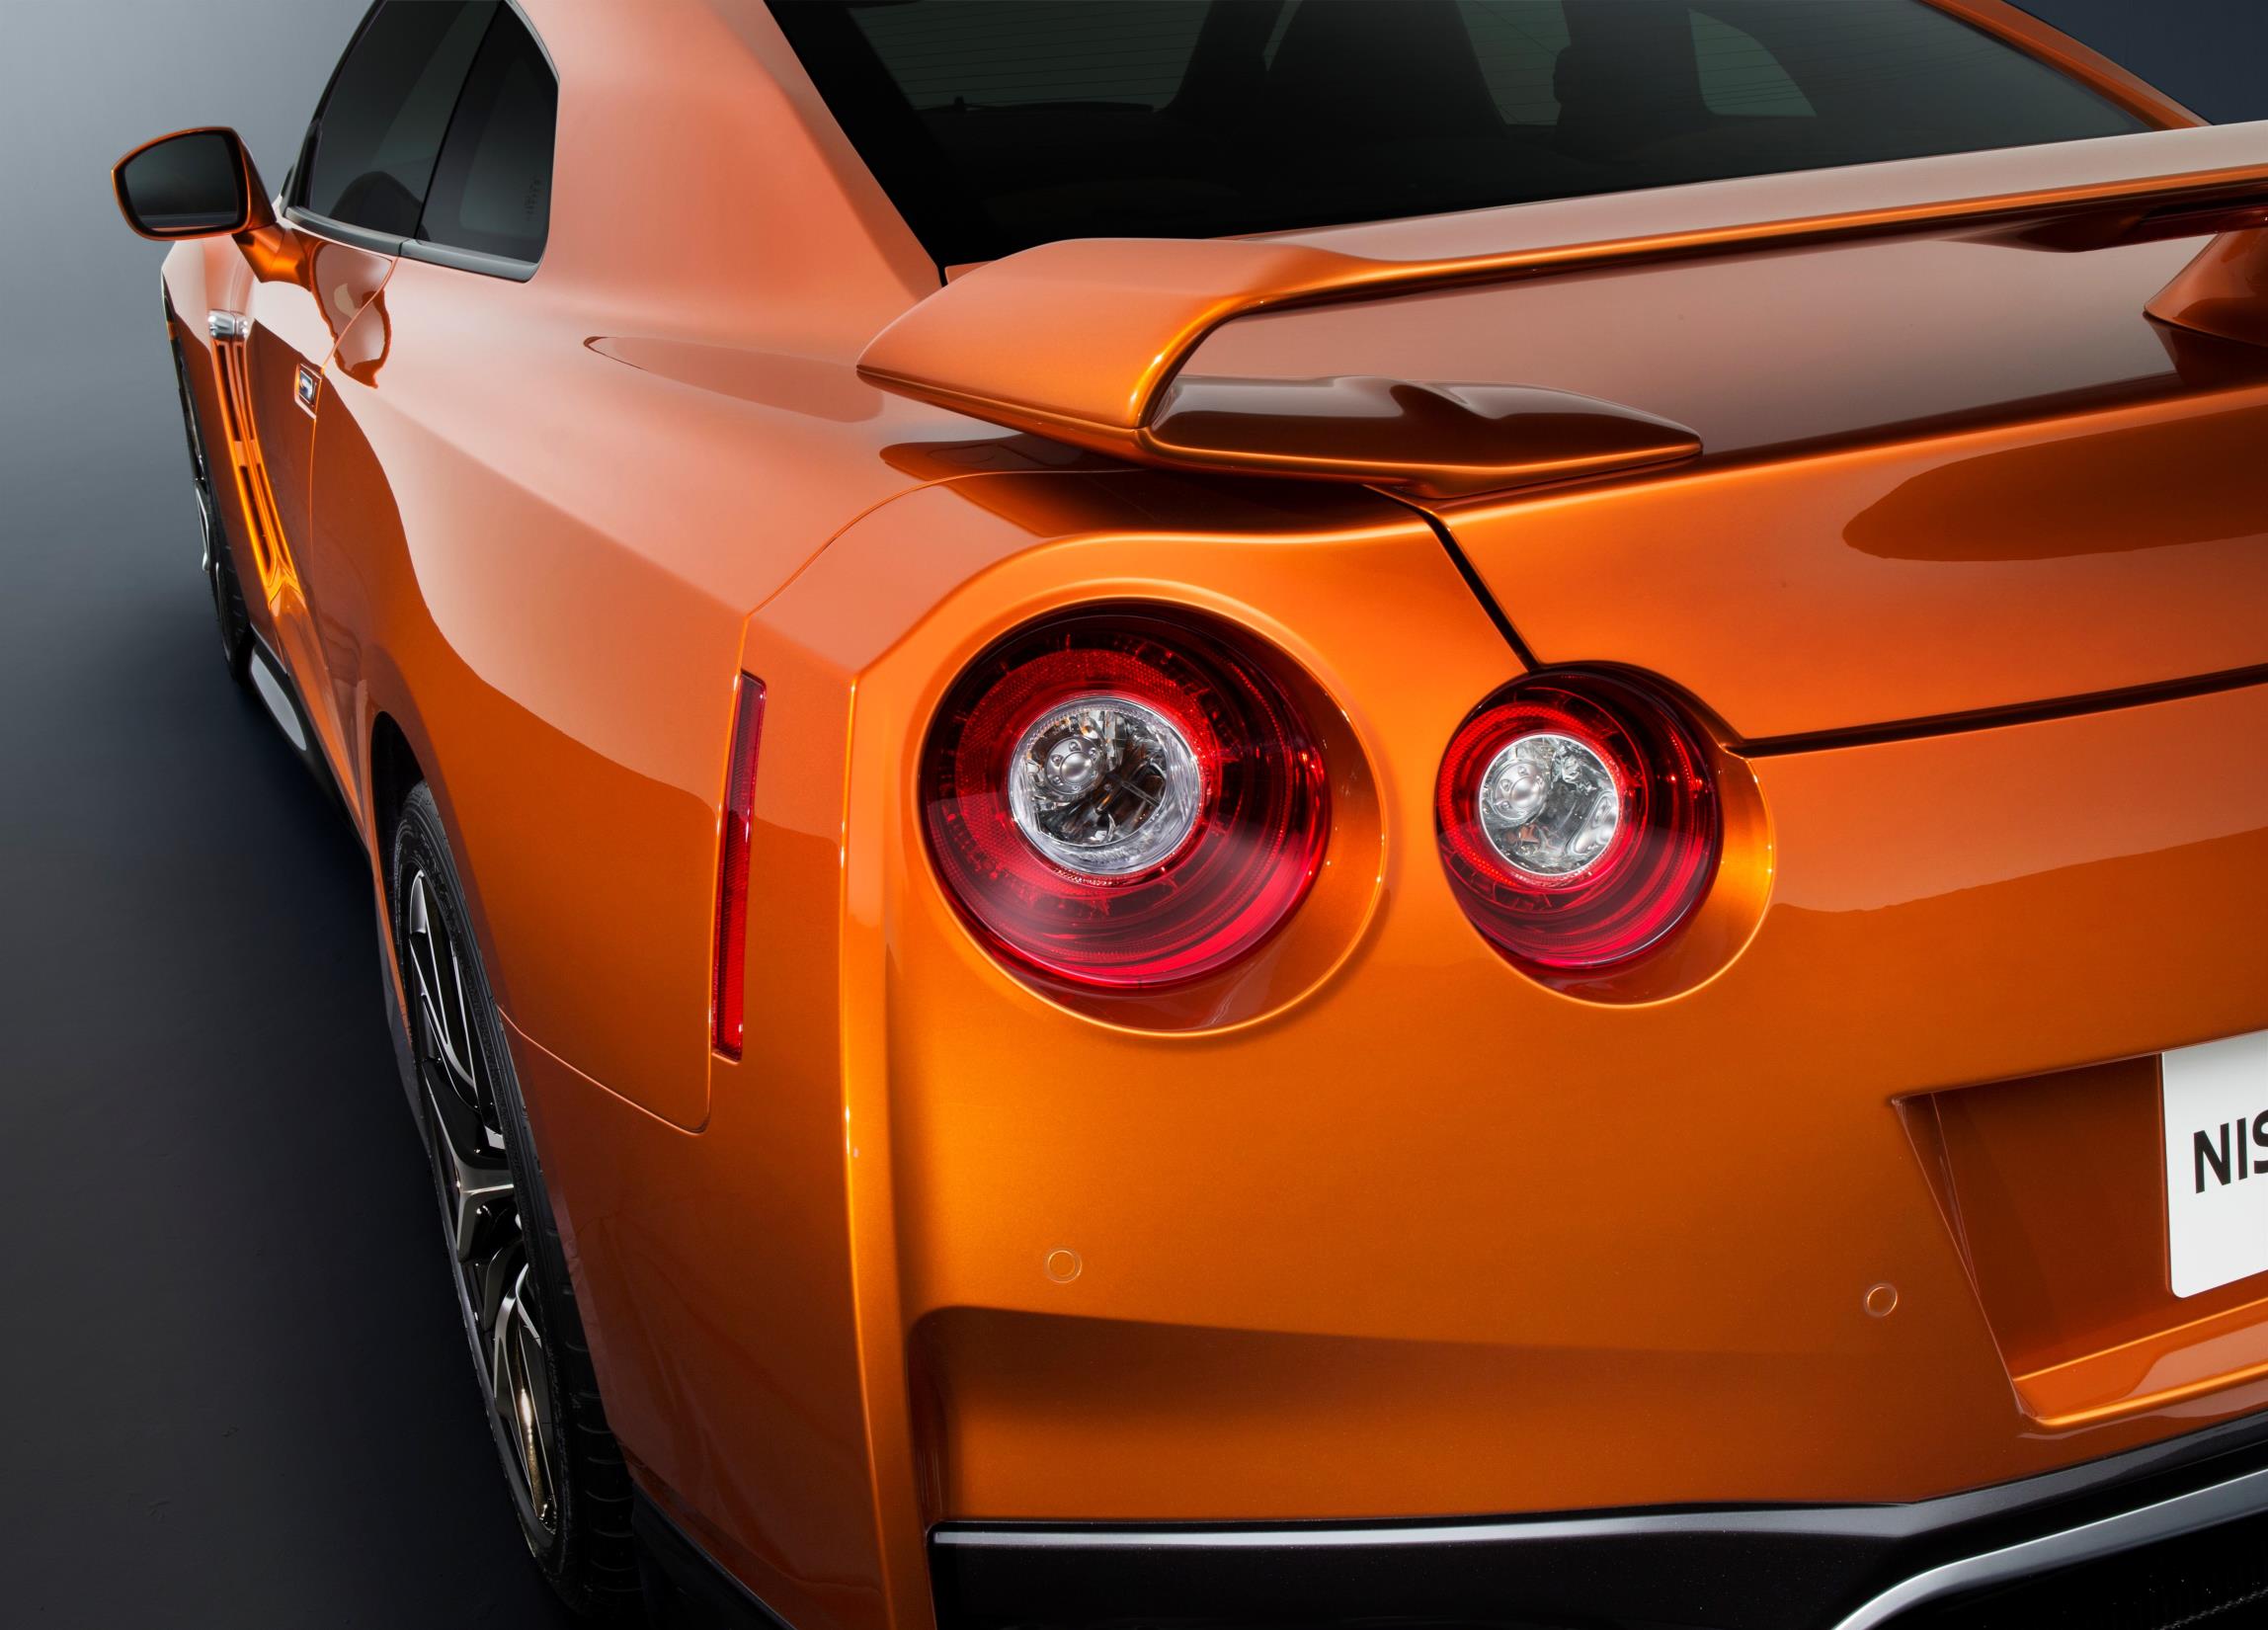 Discover the future of cars and transportation technology via @carsfera www.carsfera.com #cars #autoshow #conceptcars #conceptvehicles #bestcarstobuy #showroom #testdrive #safecar #safestcars #cars2017 #cars2018 #Nissan_GT-R_2017